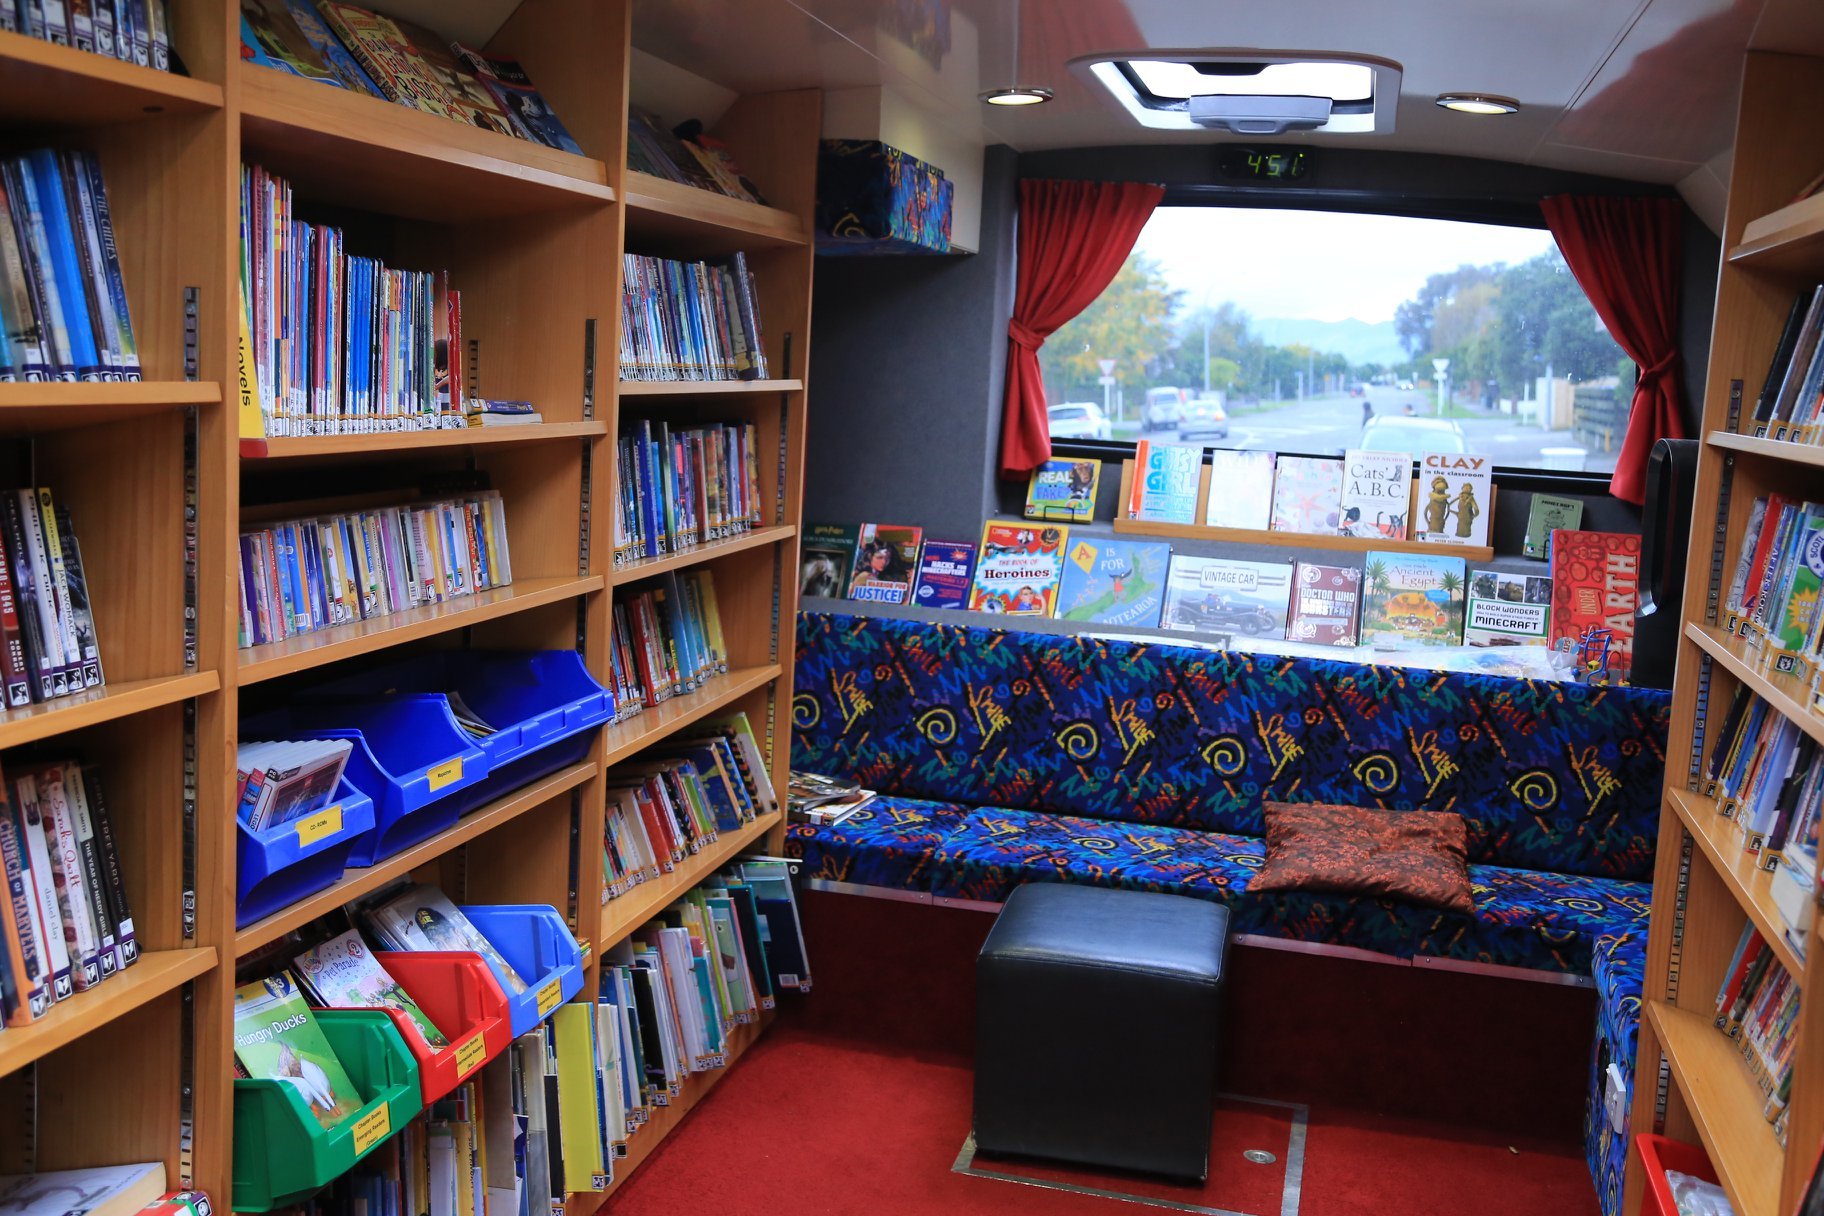 Bus and Books